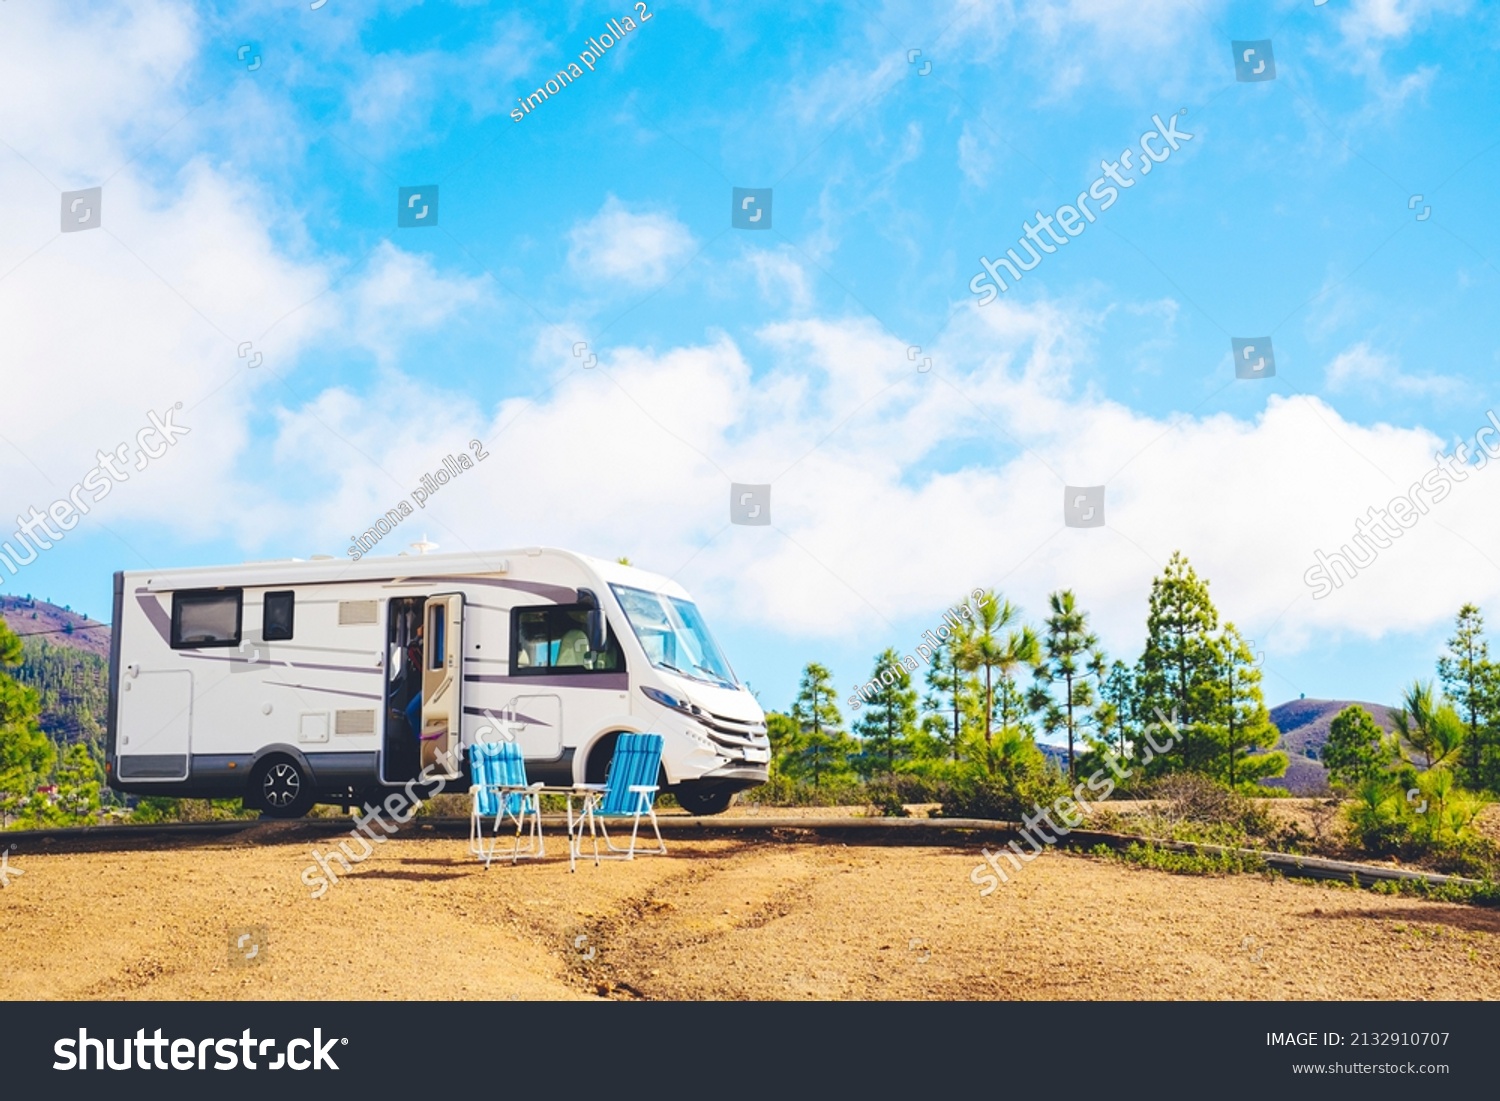 Beautiful tourism camper van campsite in the nature. Travel and rv renting vehicle vacation. Vanlife and wanderlust concept with modern motorhome parked in the nature with blue sky background #2132910707